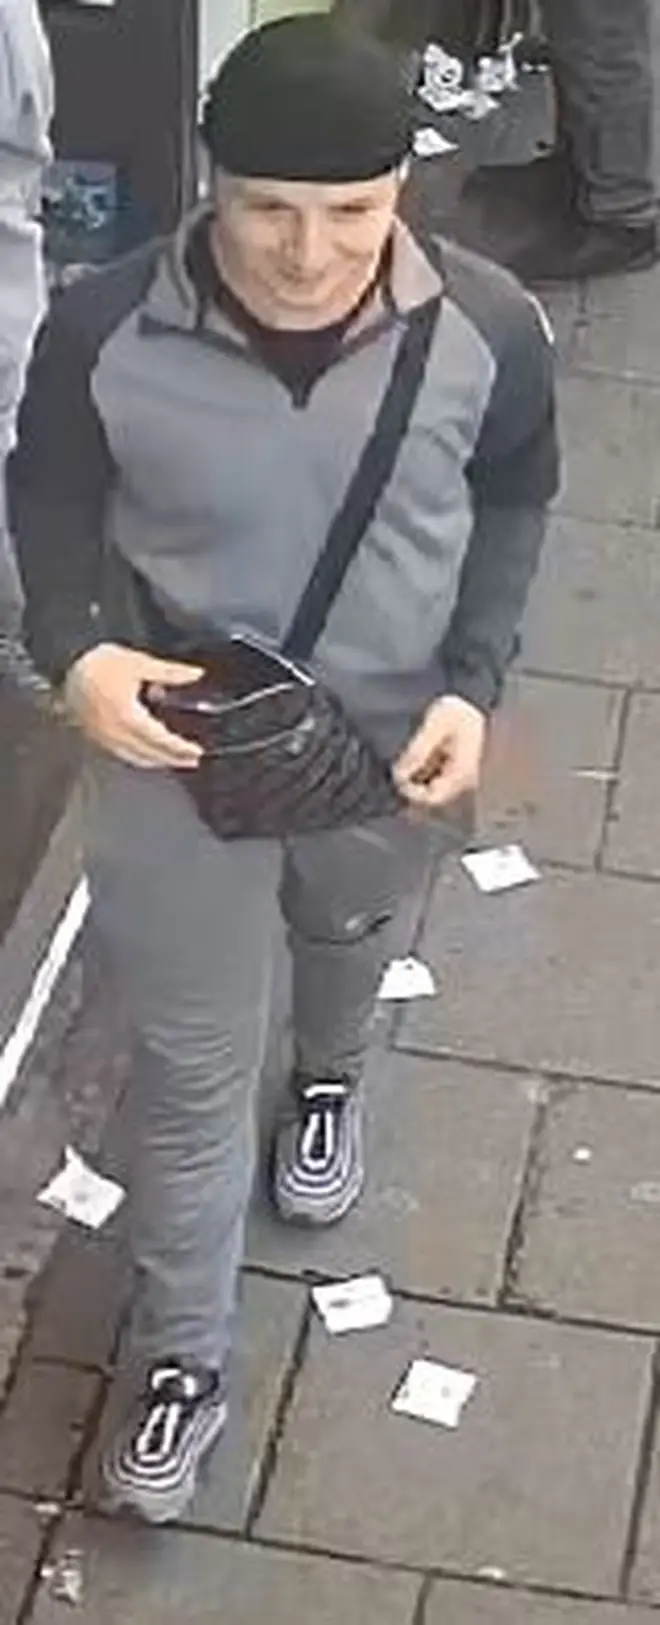 The second suspect leaving the shop